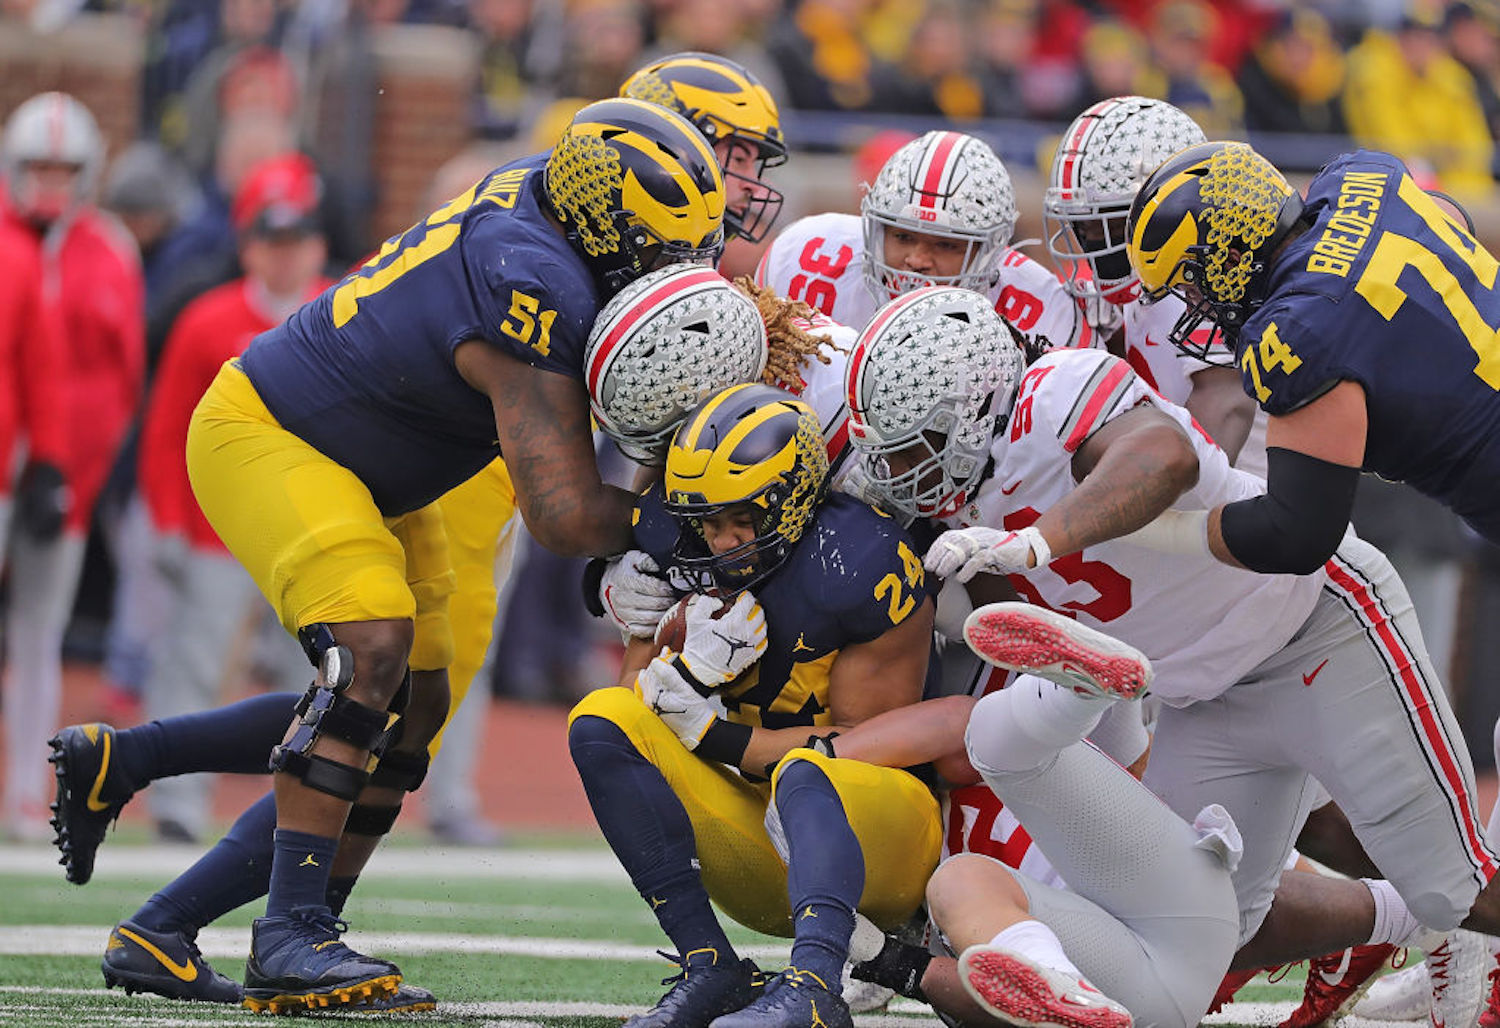 When Was the Last Time Ohio State and Michigan Didn’t Play in a Season?